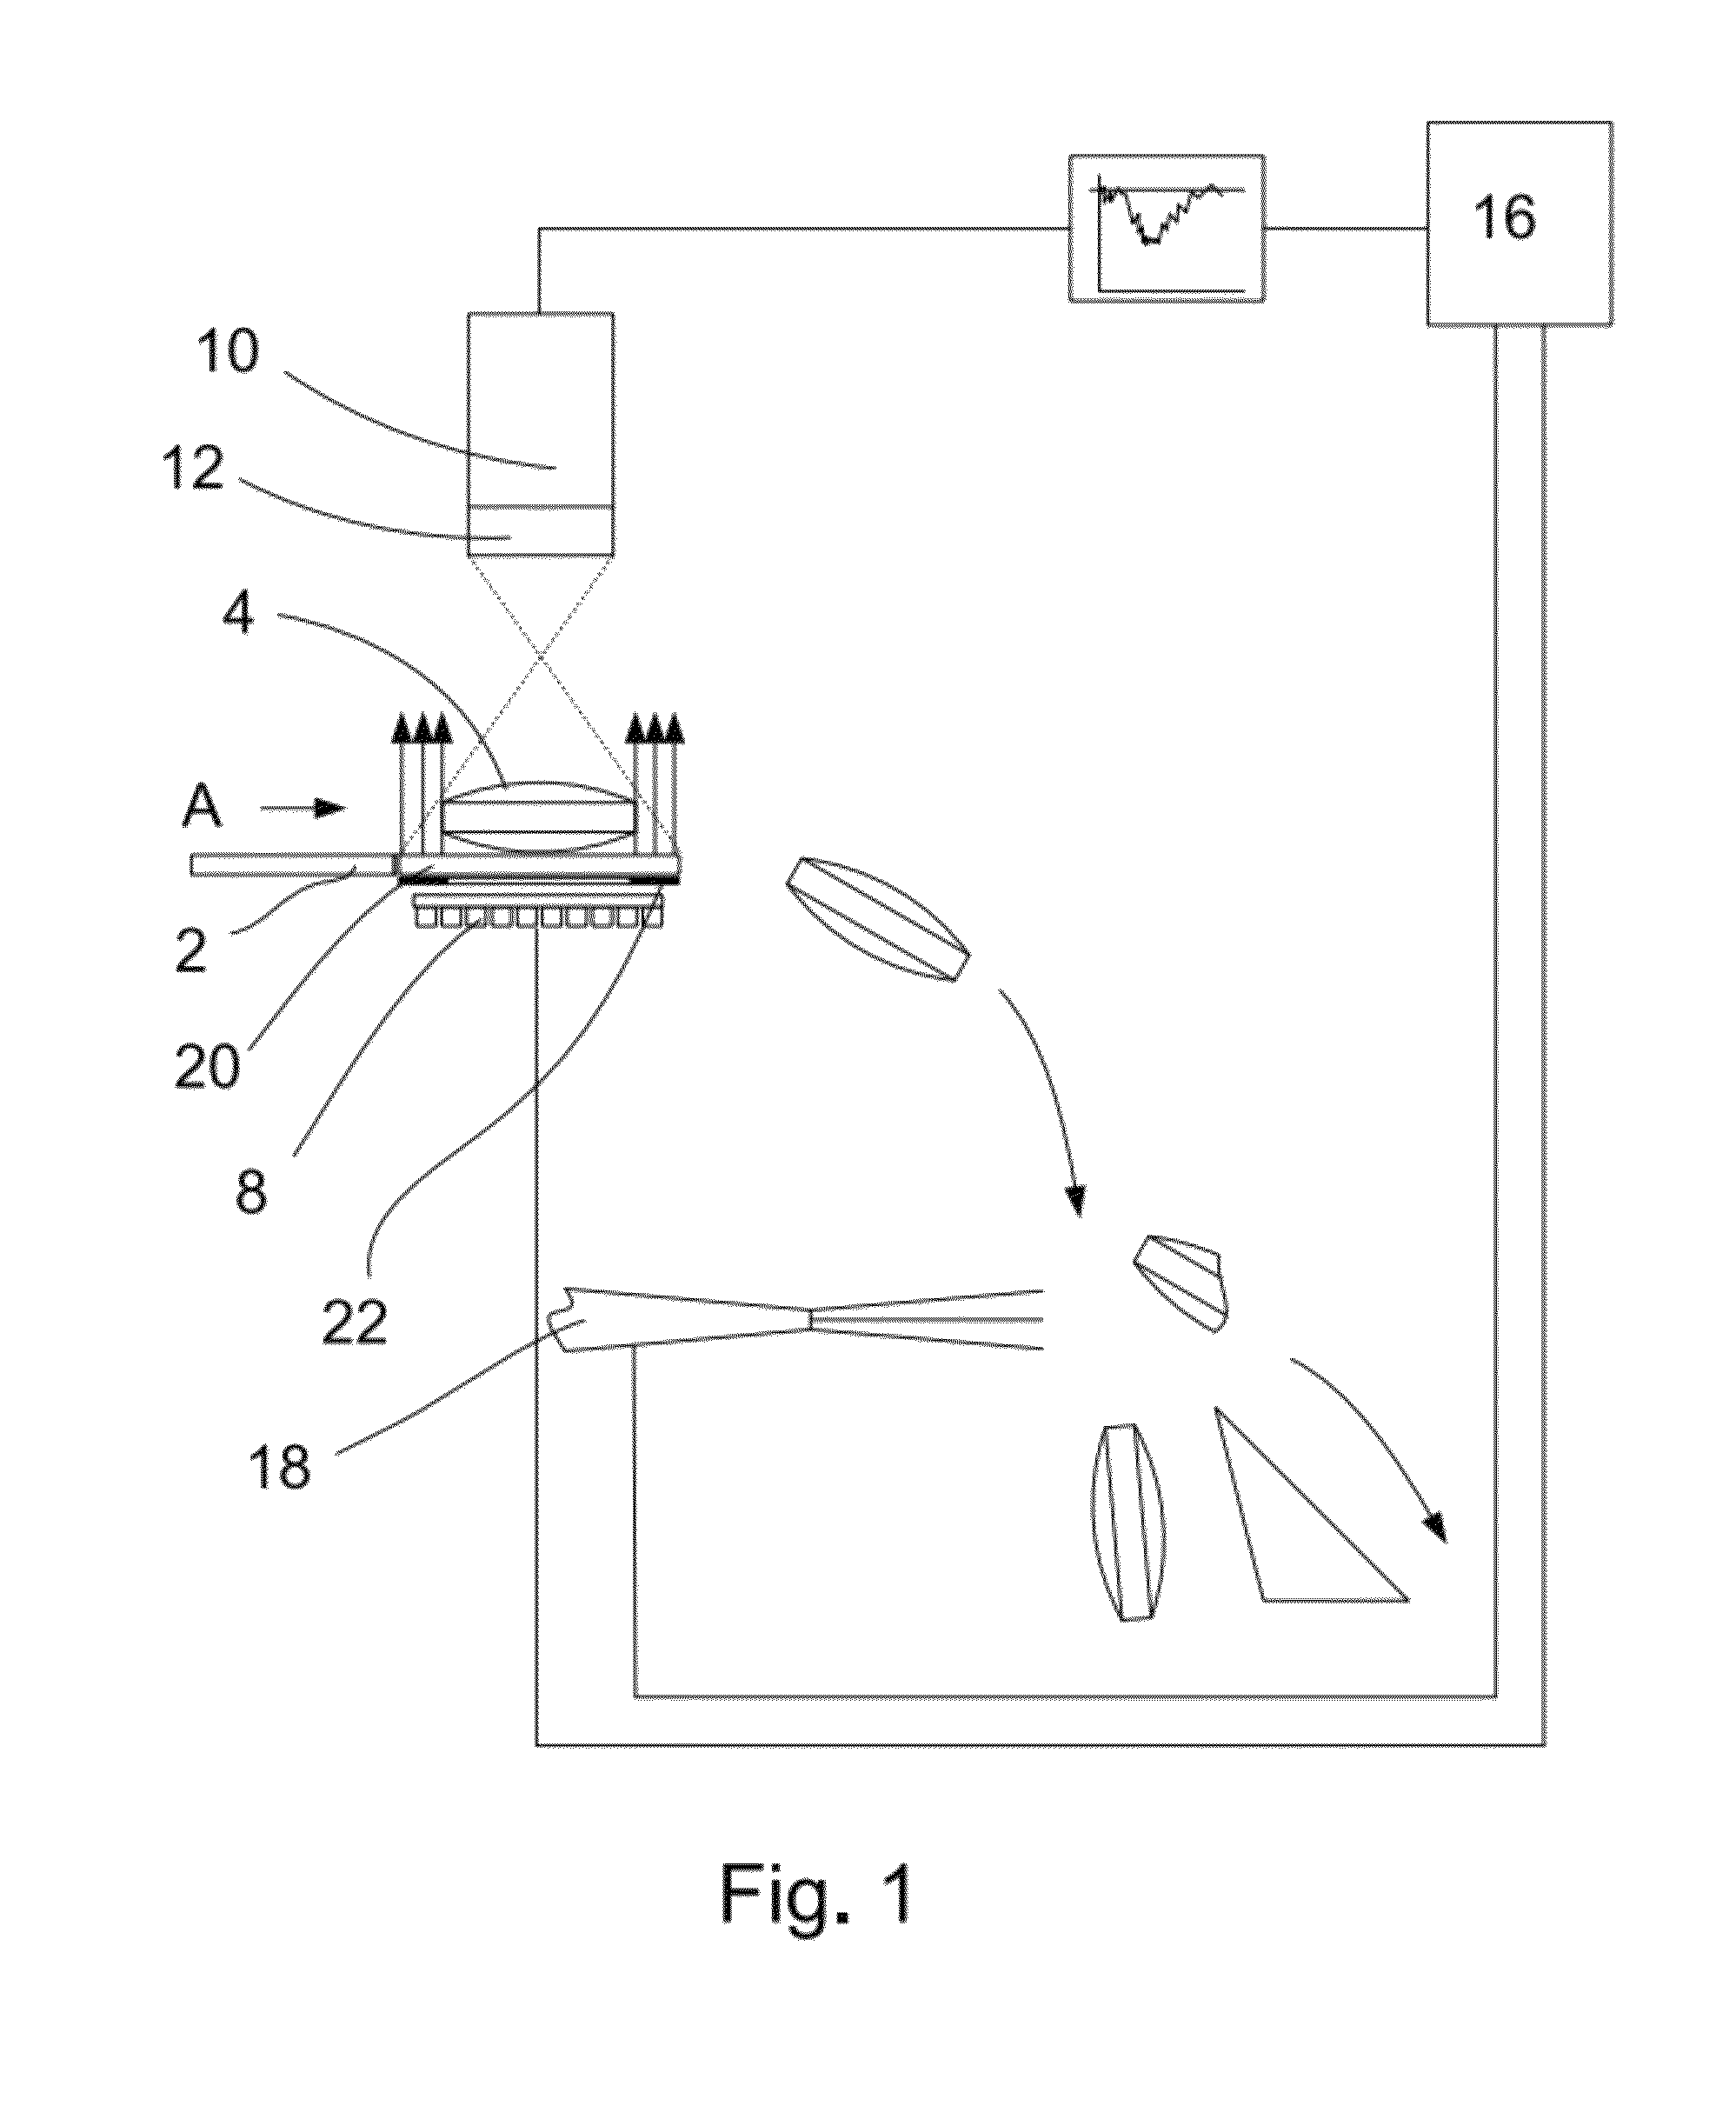 Device for inspecting small pharmaceutical products